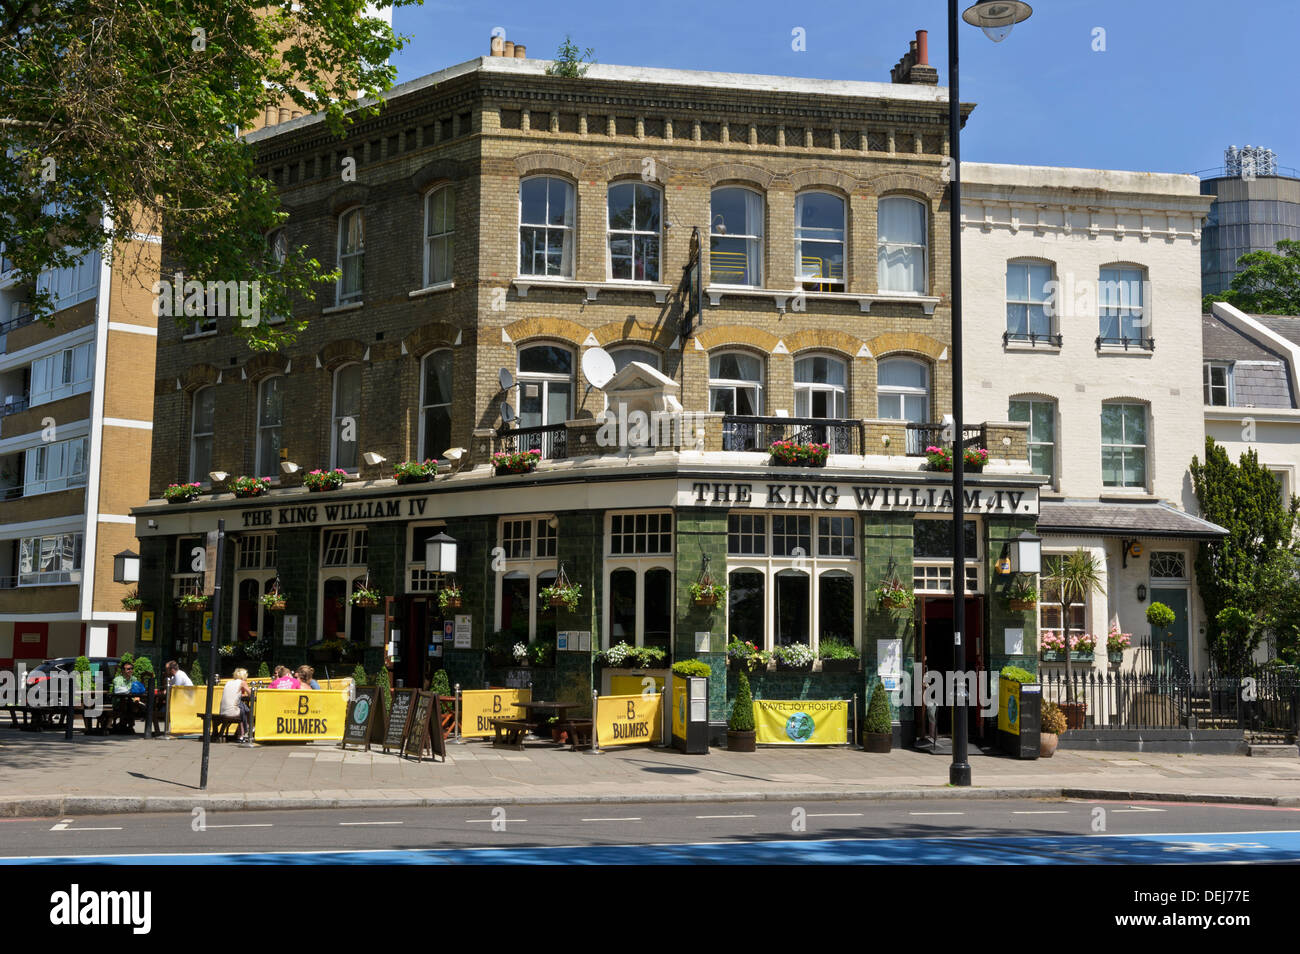 The King William Pub High Resolution Stock Photography and Images - Alamy